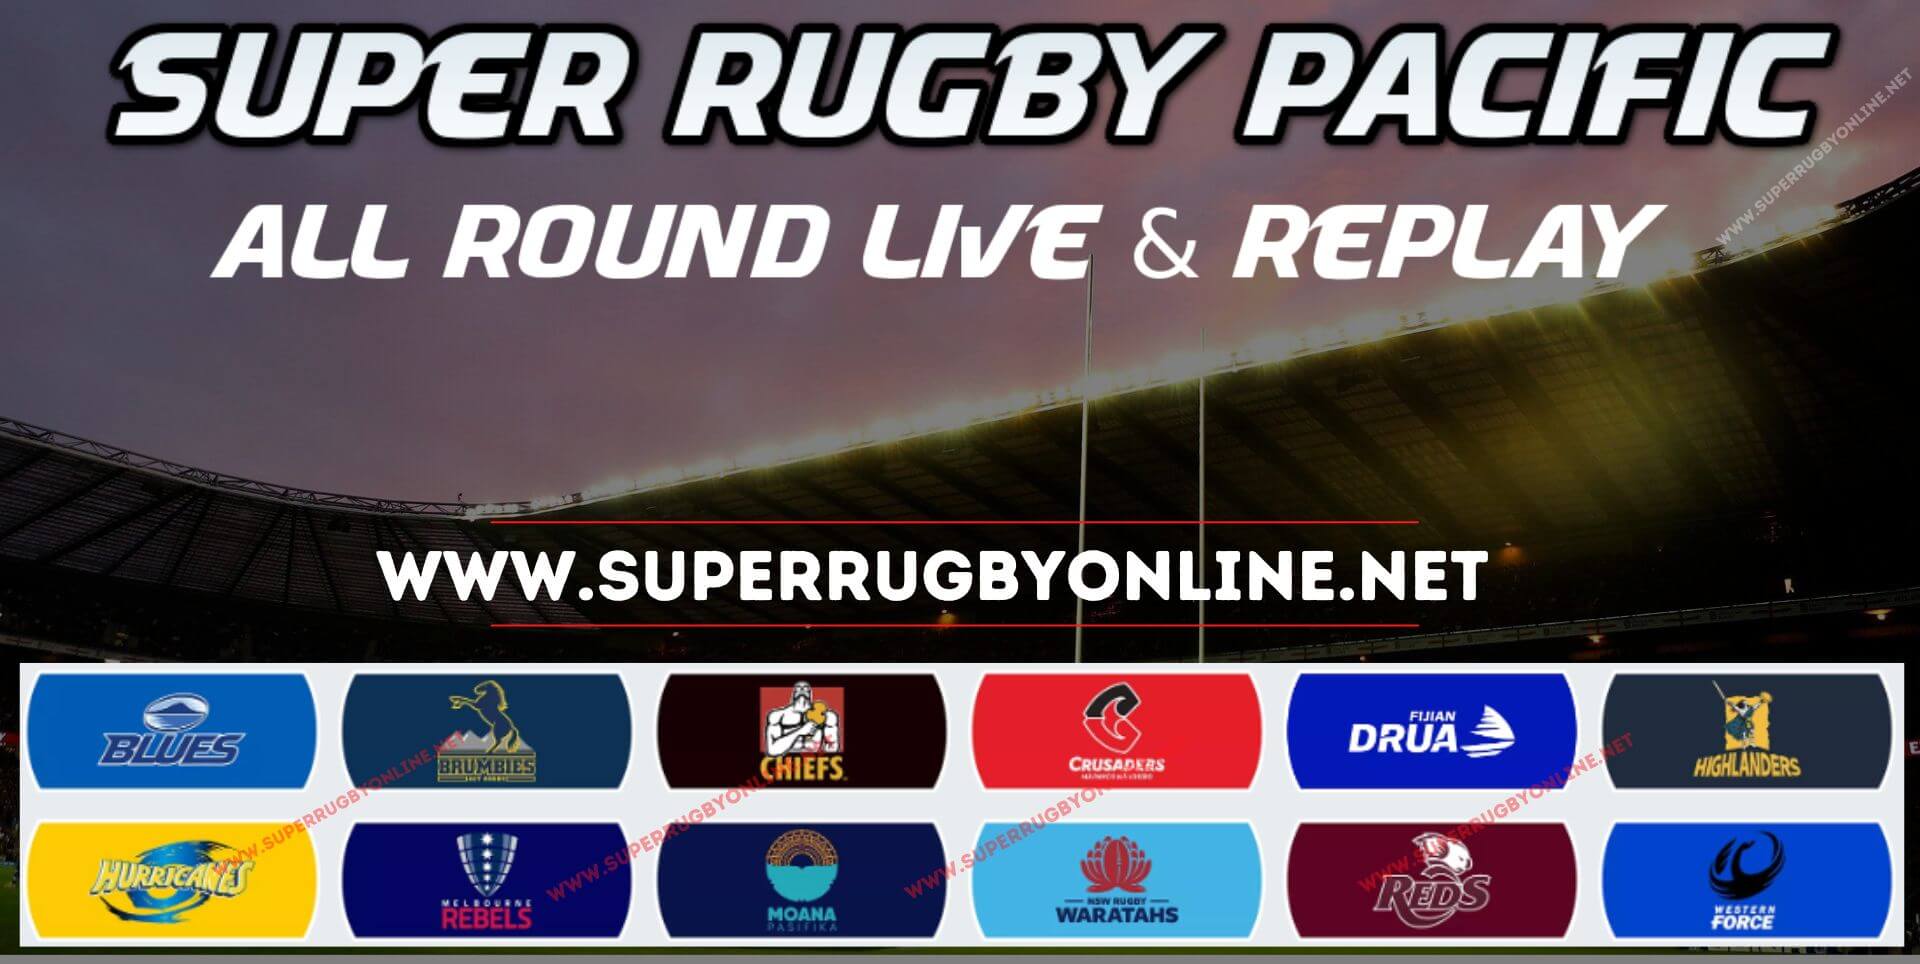 Super Rugby Pacific Round 1 Live Stream